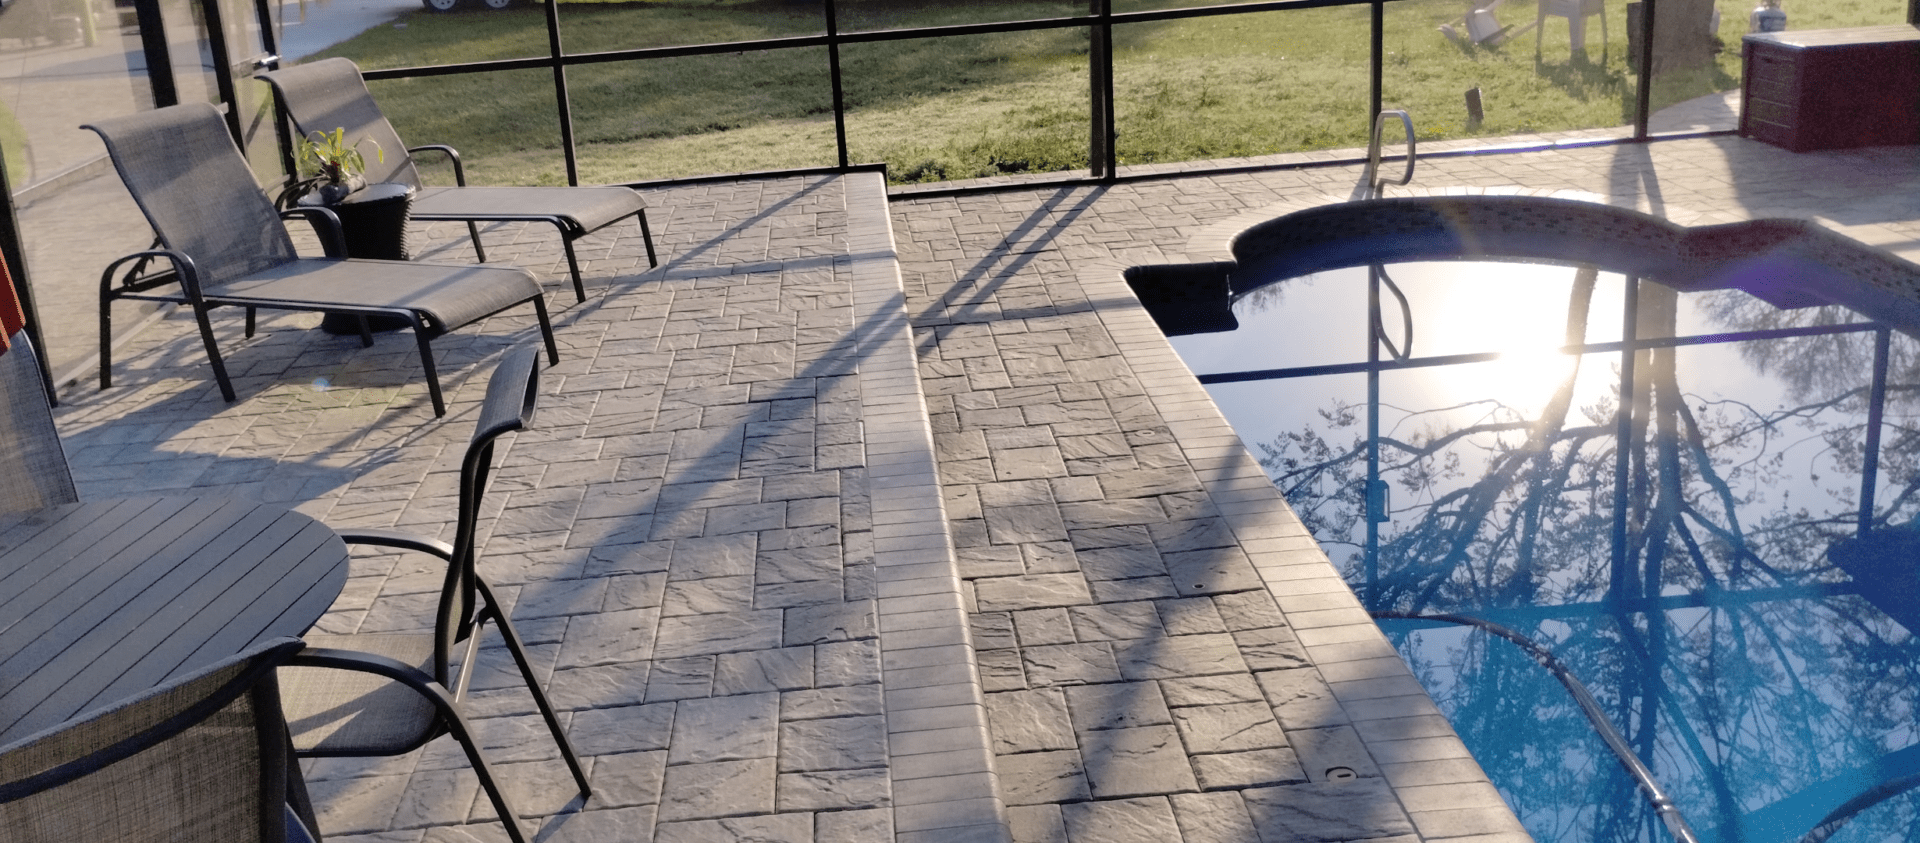 Brick Paver patio with Pool with coping